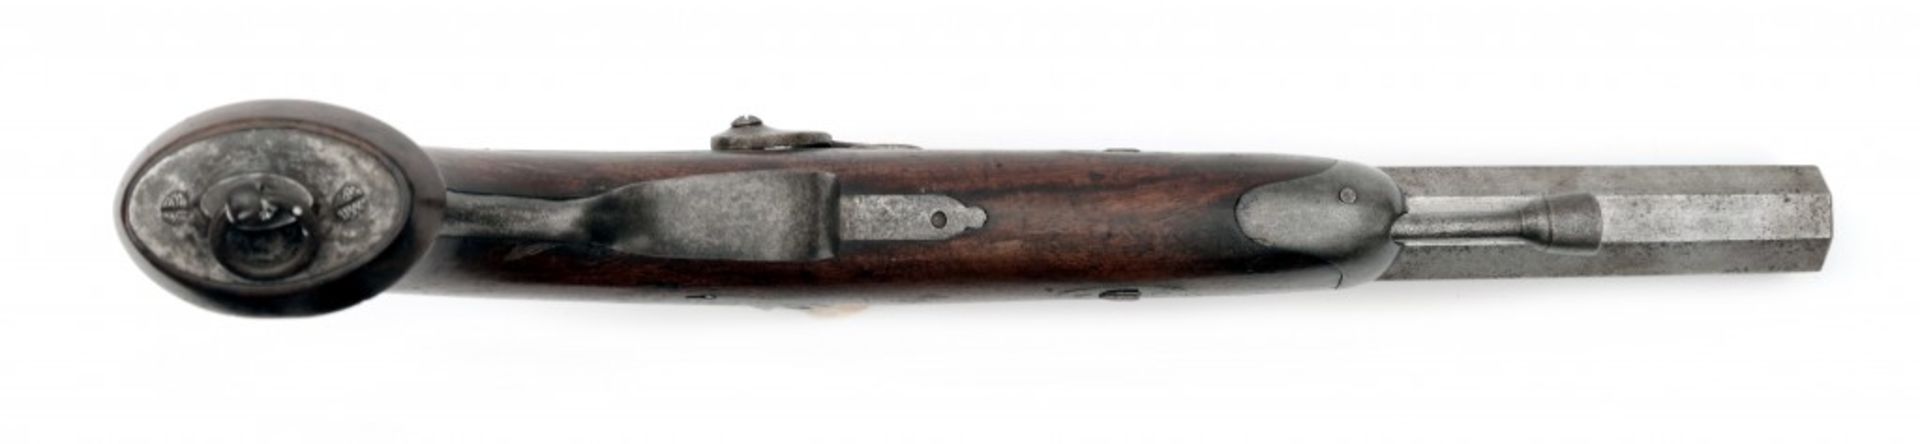 A Pair of French Officer´s Pistols< - Image 4 of 4